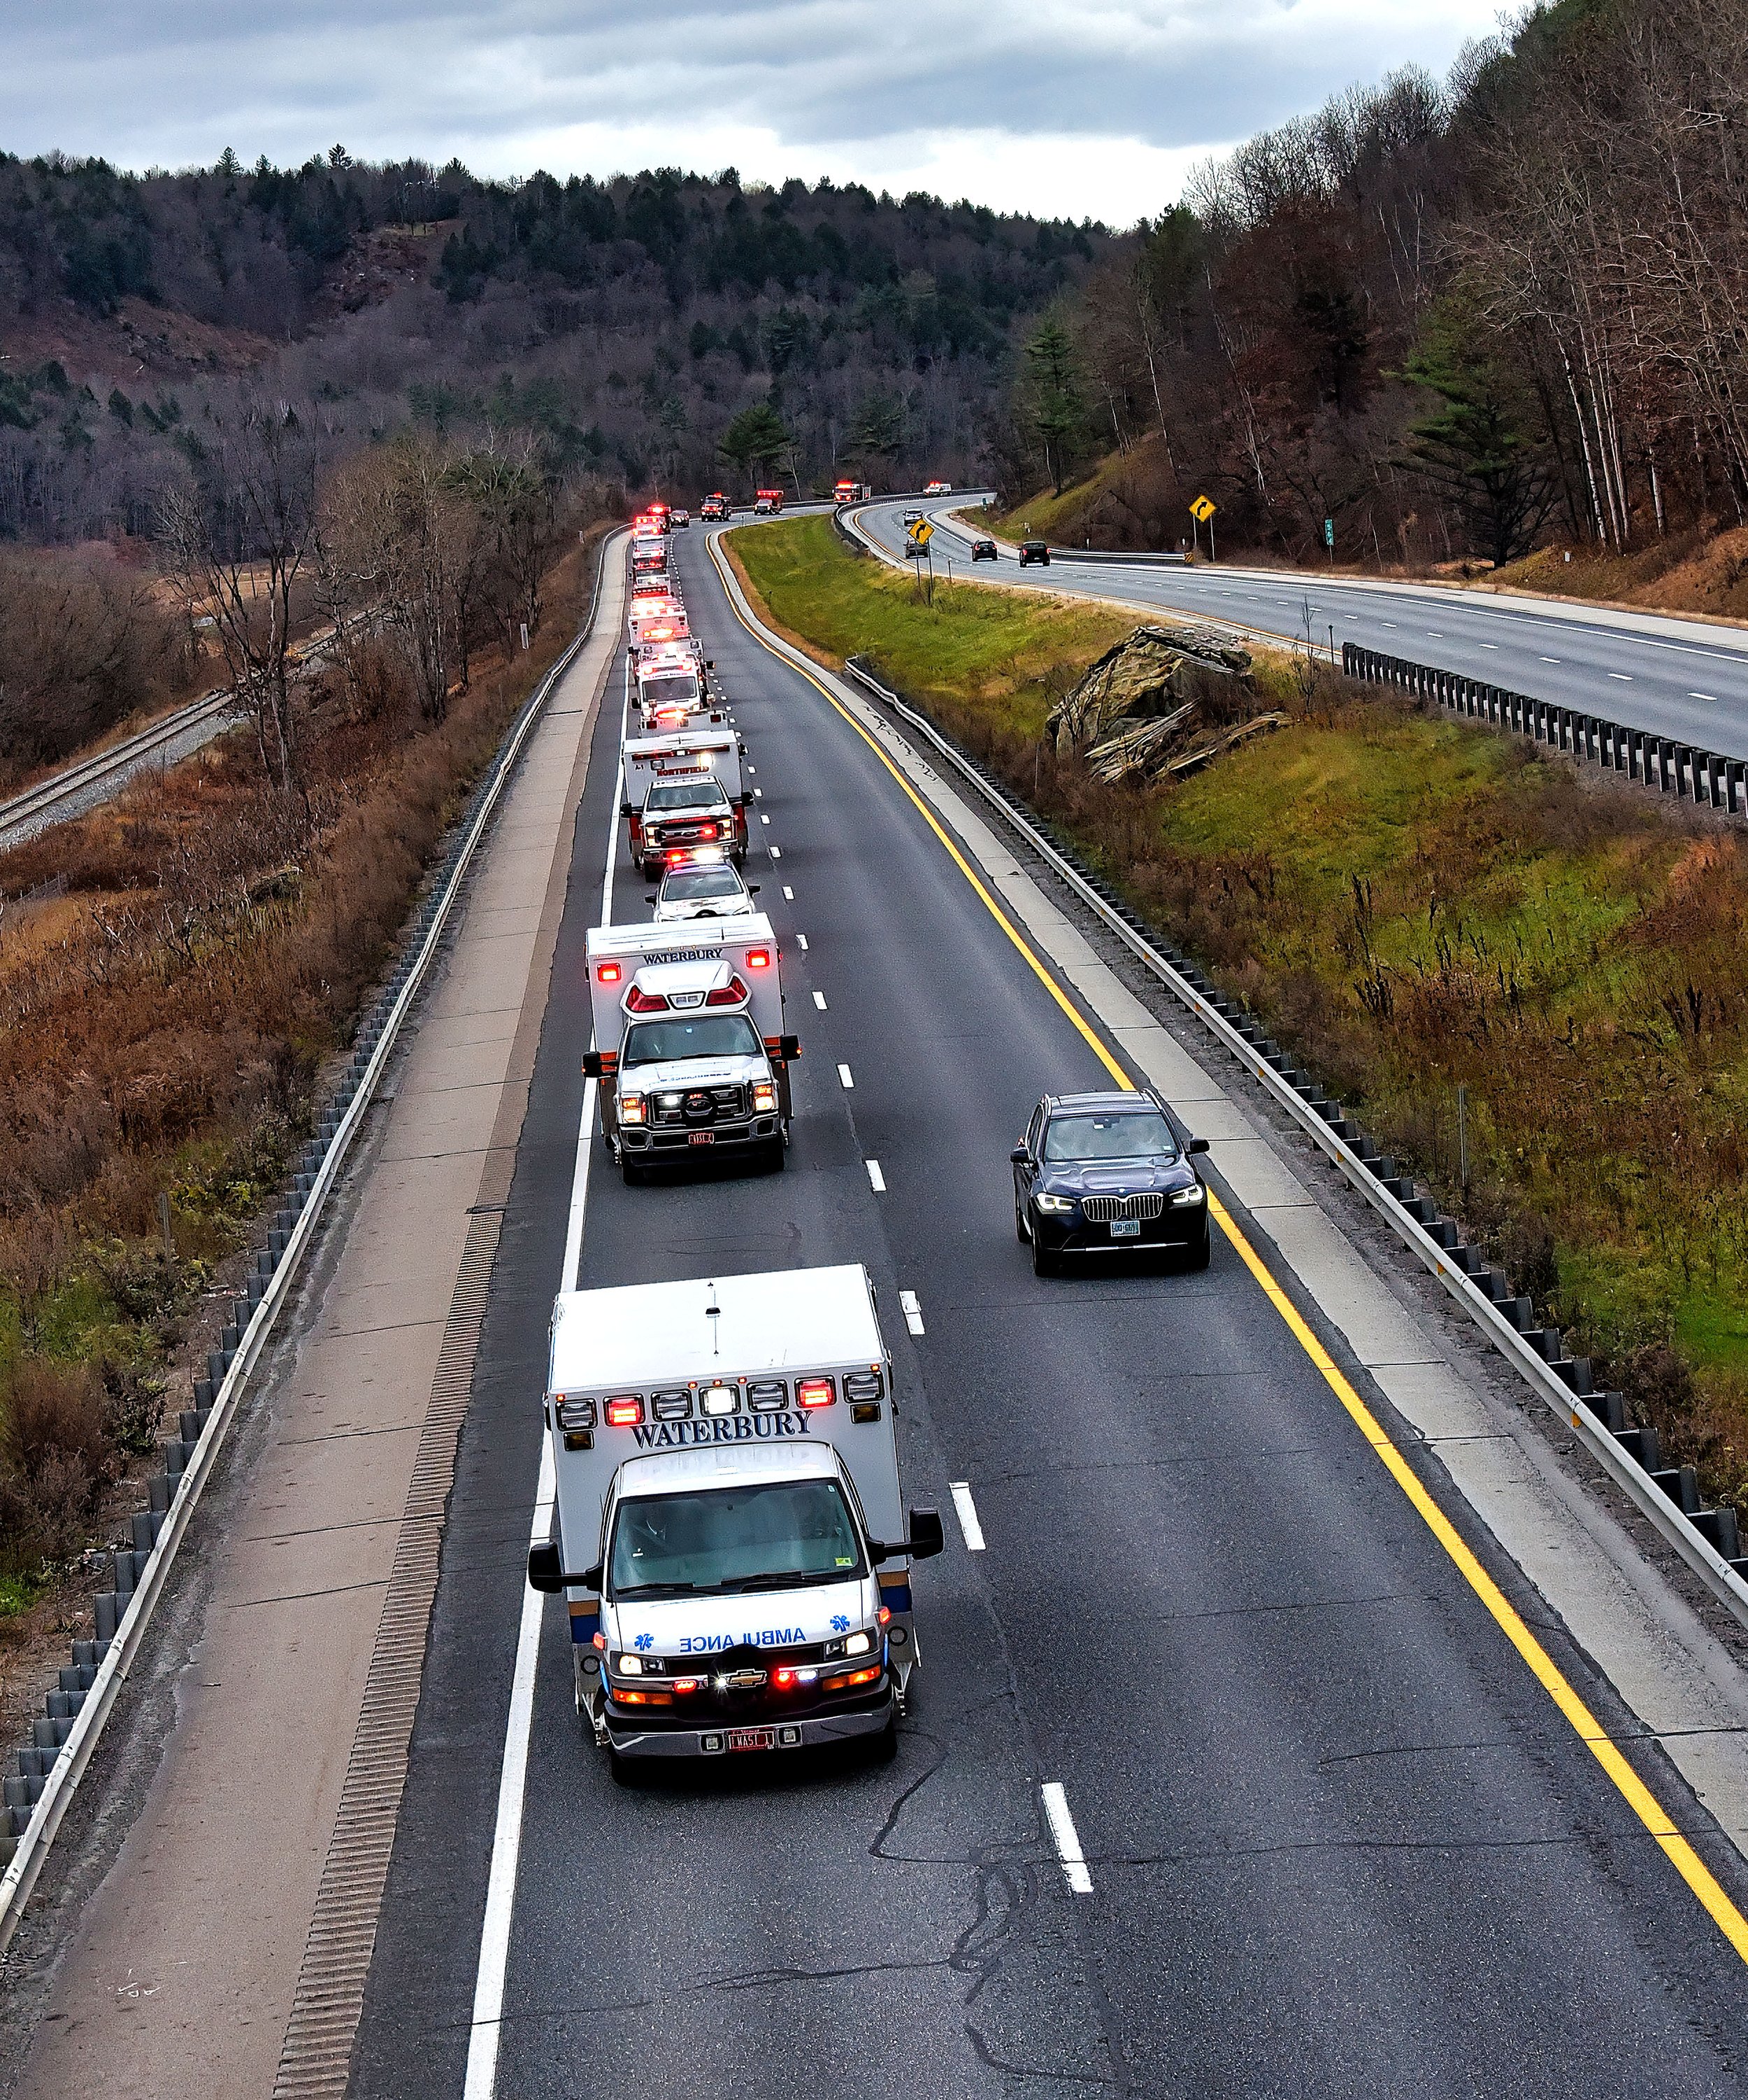  Keeping to the right with lights flashing, the procession moves south to Montpelier in I-89. Photo by Gordon Miller 